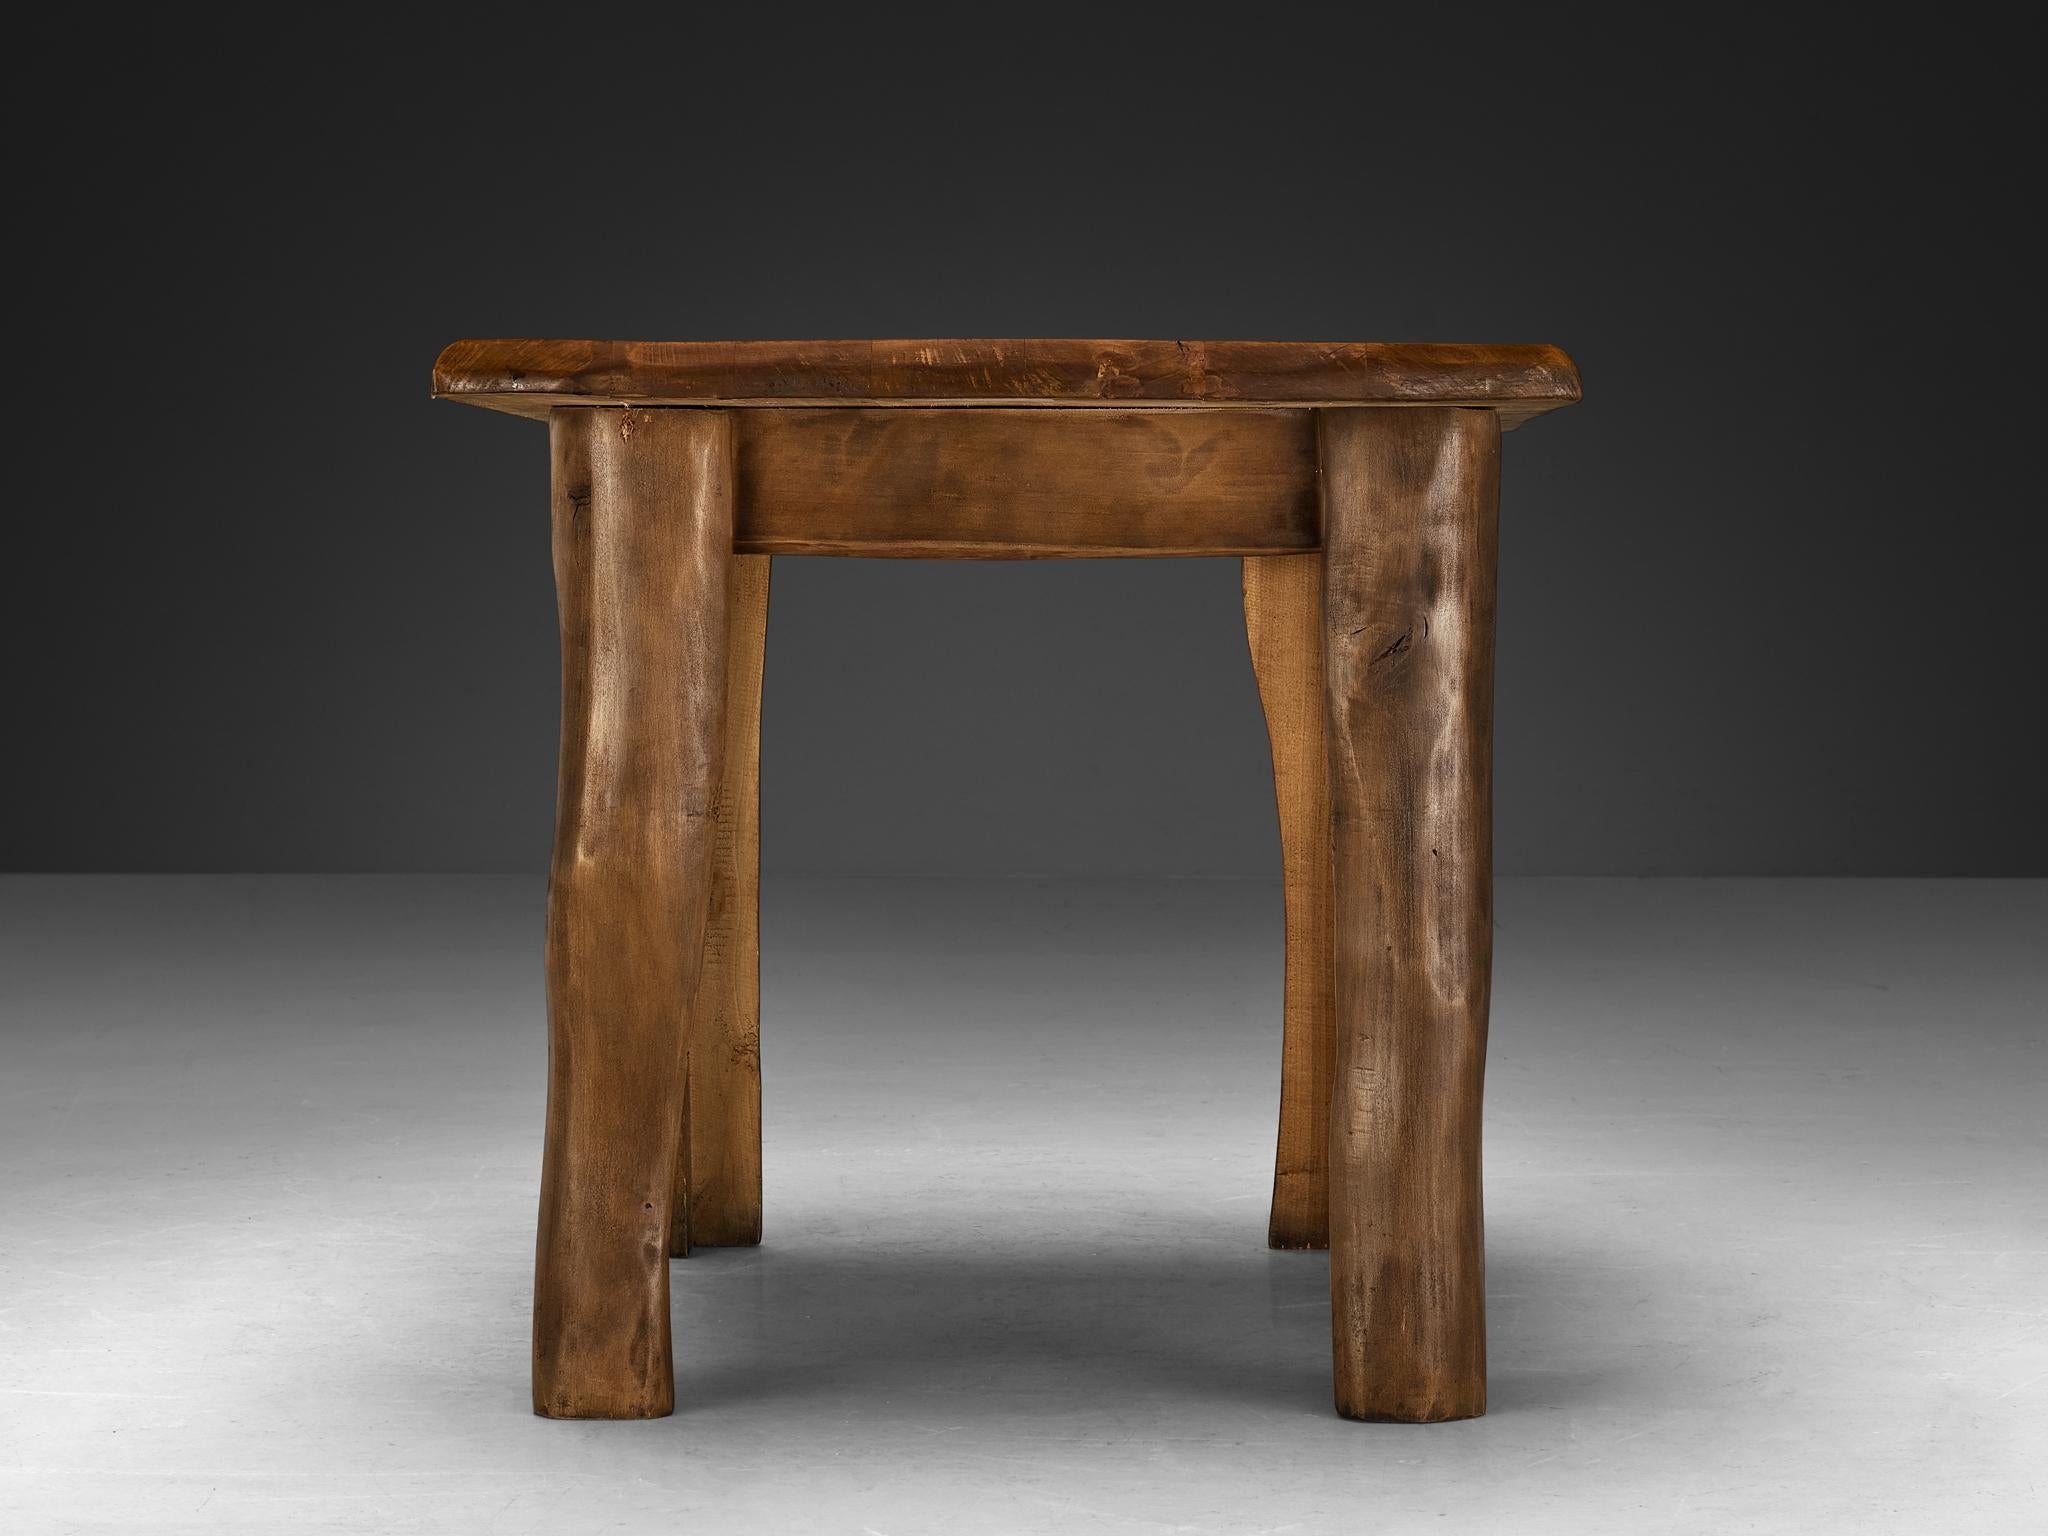 Organic Brutalist Table in Maple